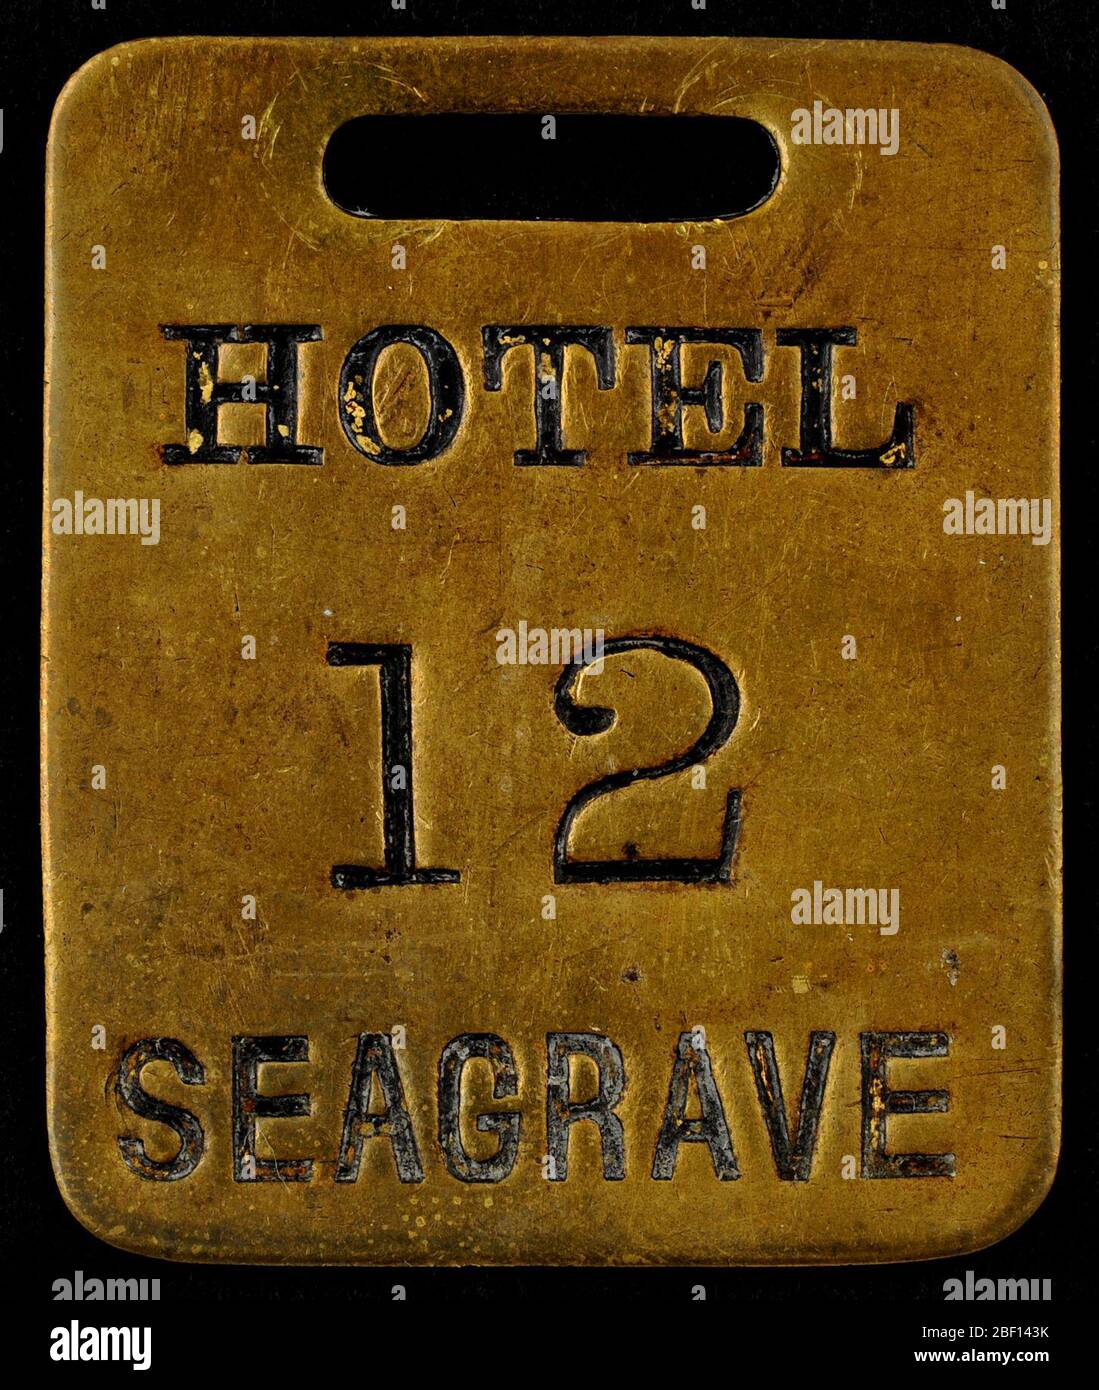 Hotel Seagrave Owney tag. Owney probably received this hotel key check token from Arthur A. Seagrave or one of his employees. Sometime in 1889-1890, Seagrave built a hotel on the corner of Virginia and 3rd Avenue in Seattle, Washington, naming it after himself. Stock Photo